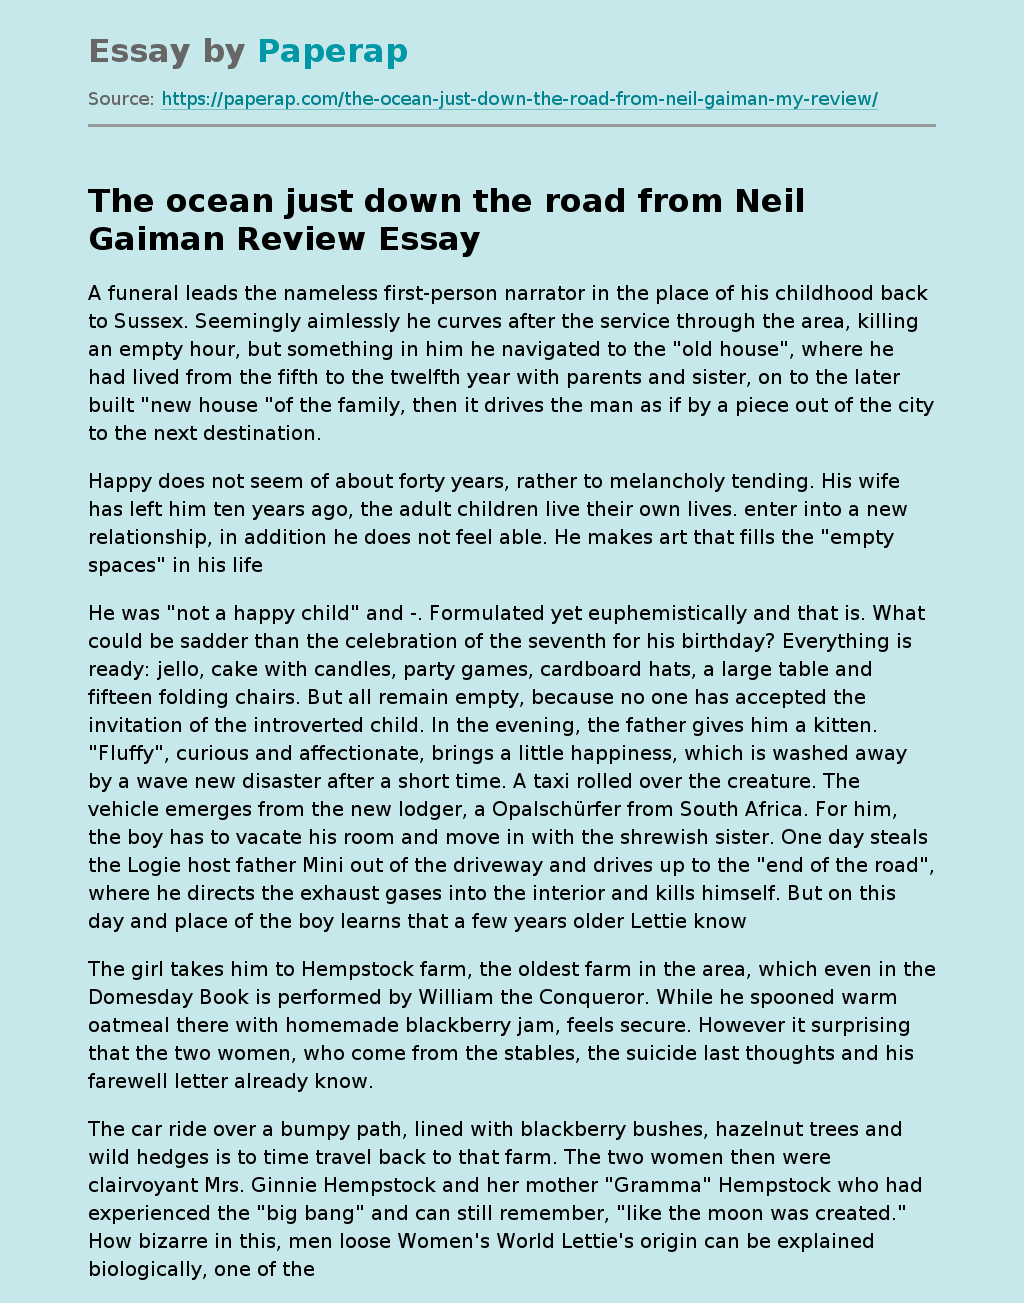 “The Ocean Just Down the Road From” by Neil Gaiman